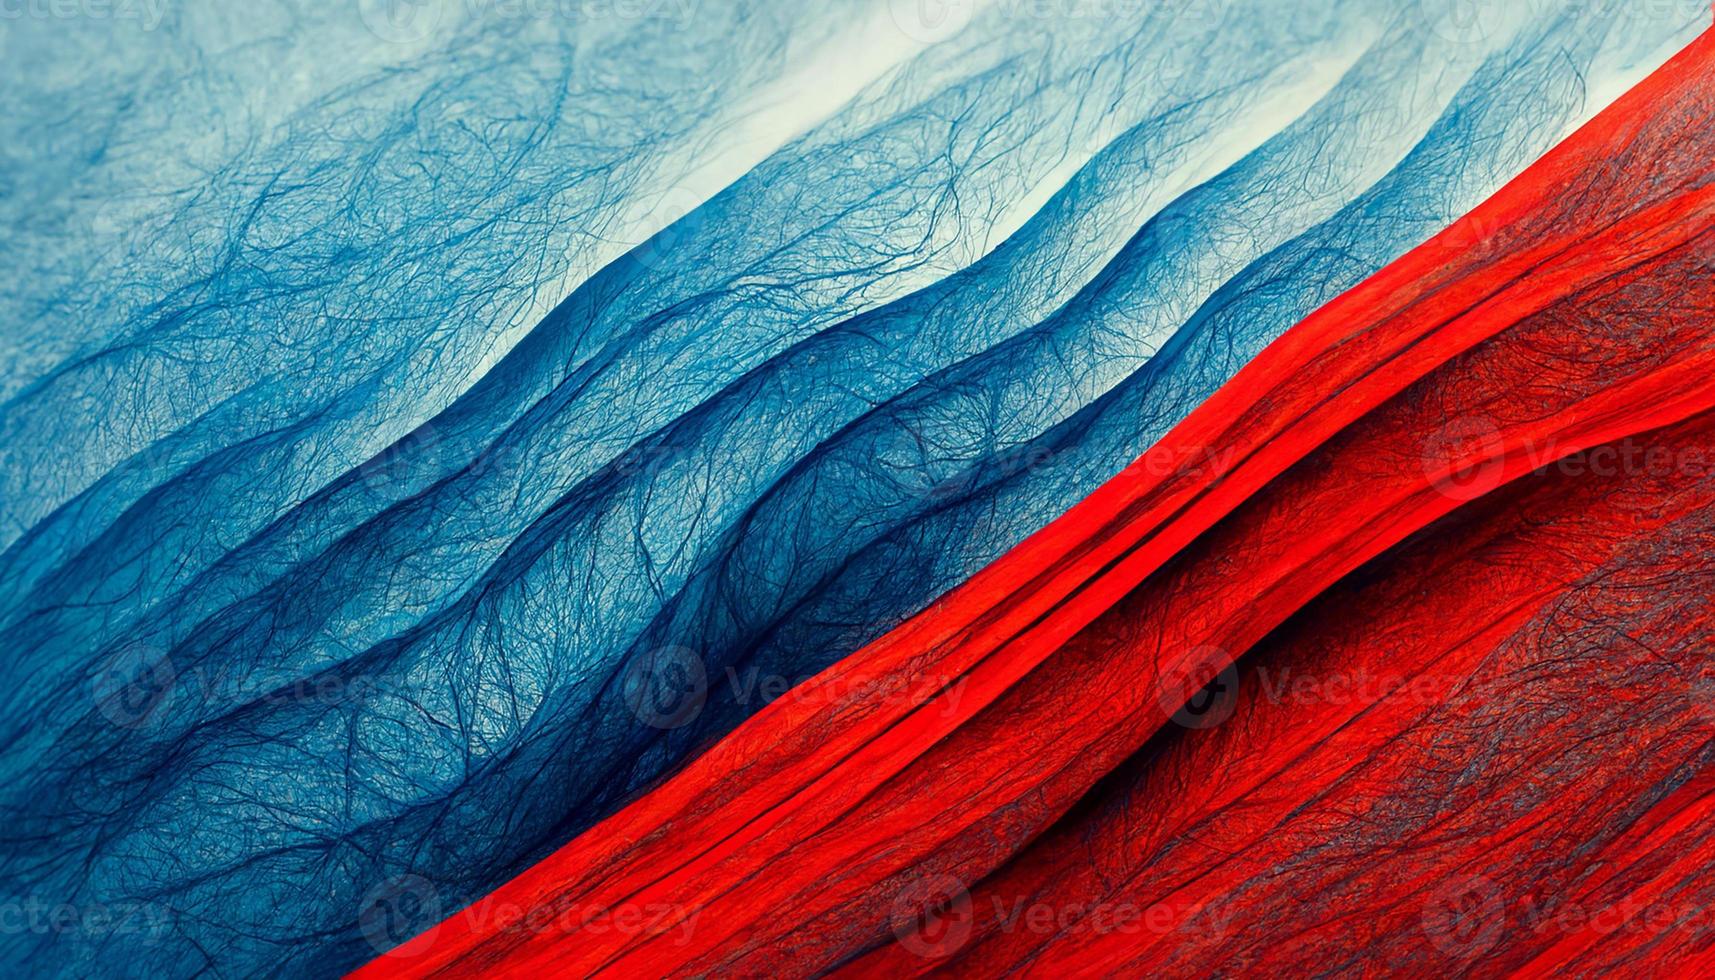 red and blue concept design to abstract background photo